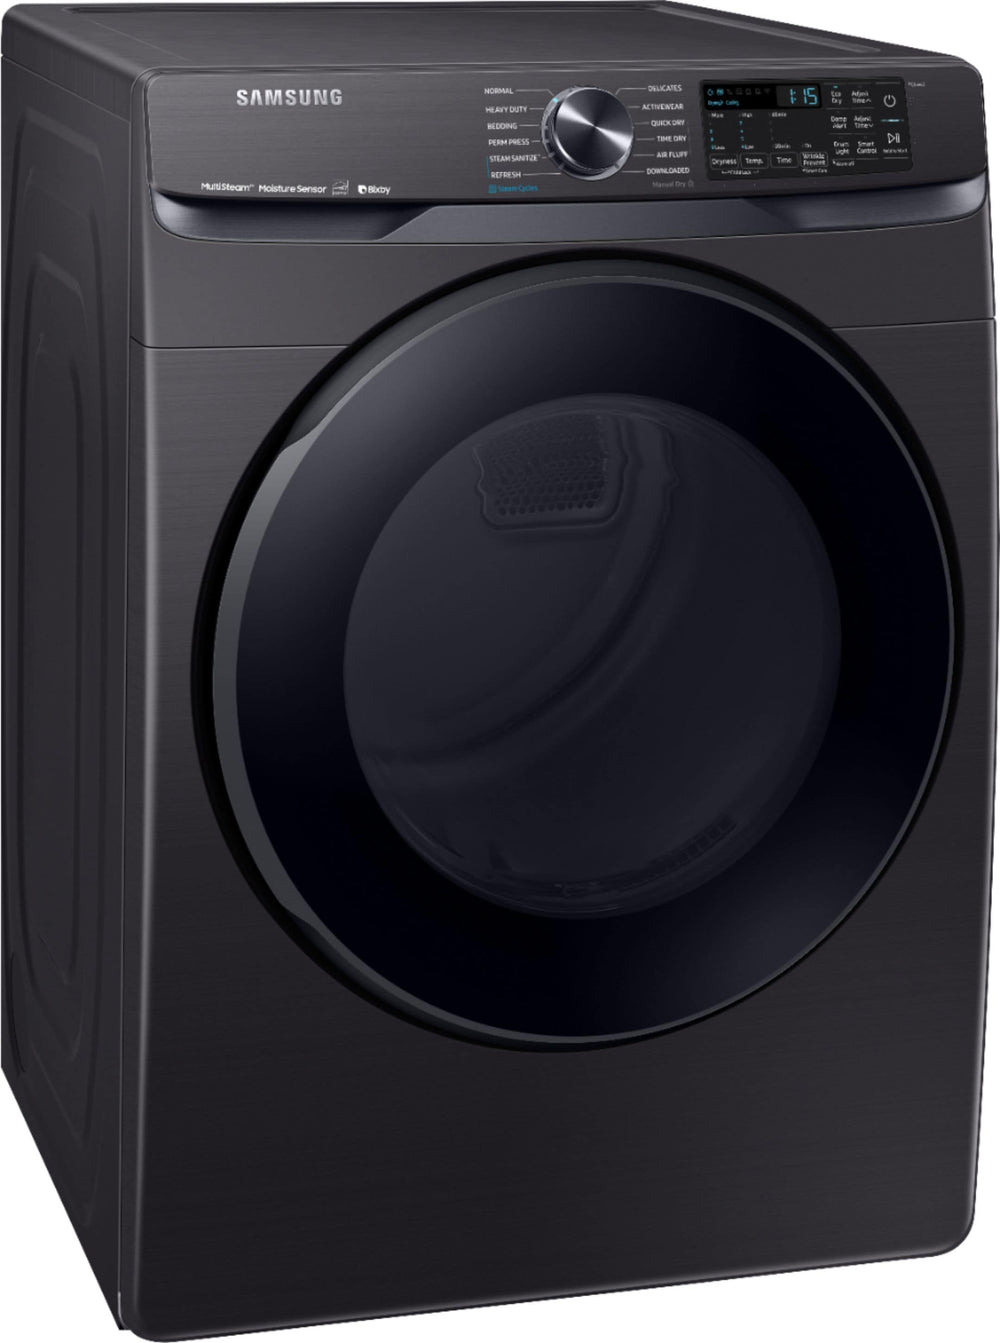 Samsung - 7.5 Cu. Ft. Stackable Smart Gas Dryer with Steam and Sensor Dry - Black stainless steel_1